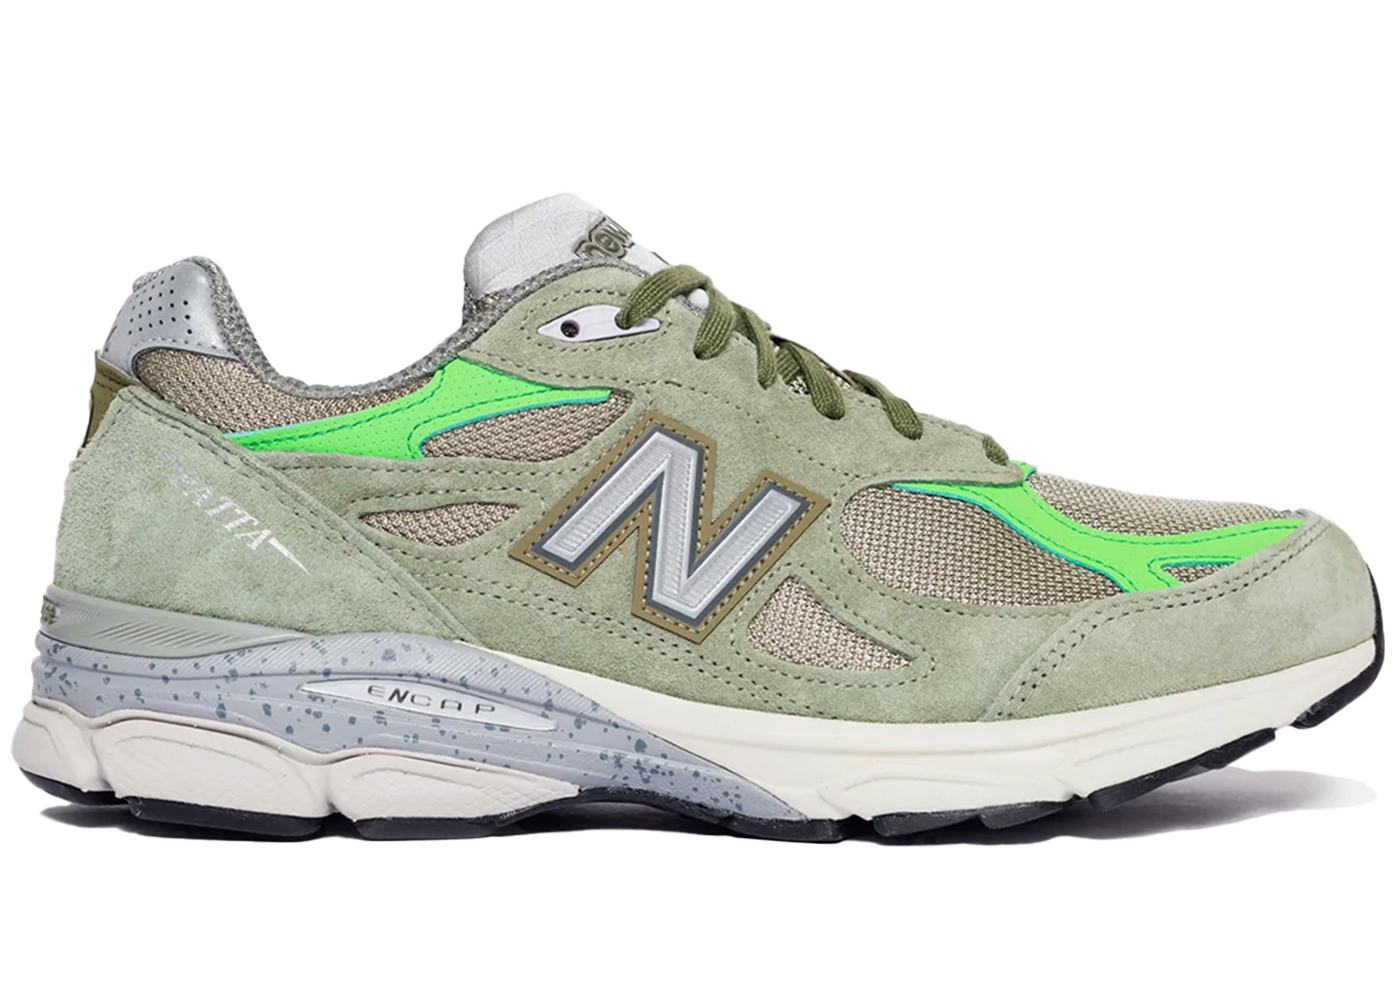 Buy New Balance 990v3 Shoes & New Sneakers - StockX